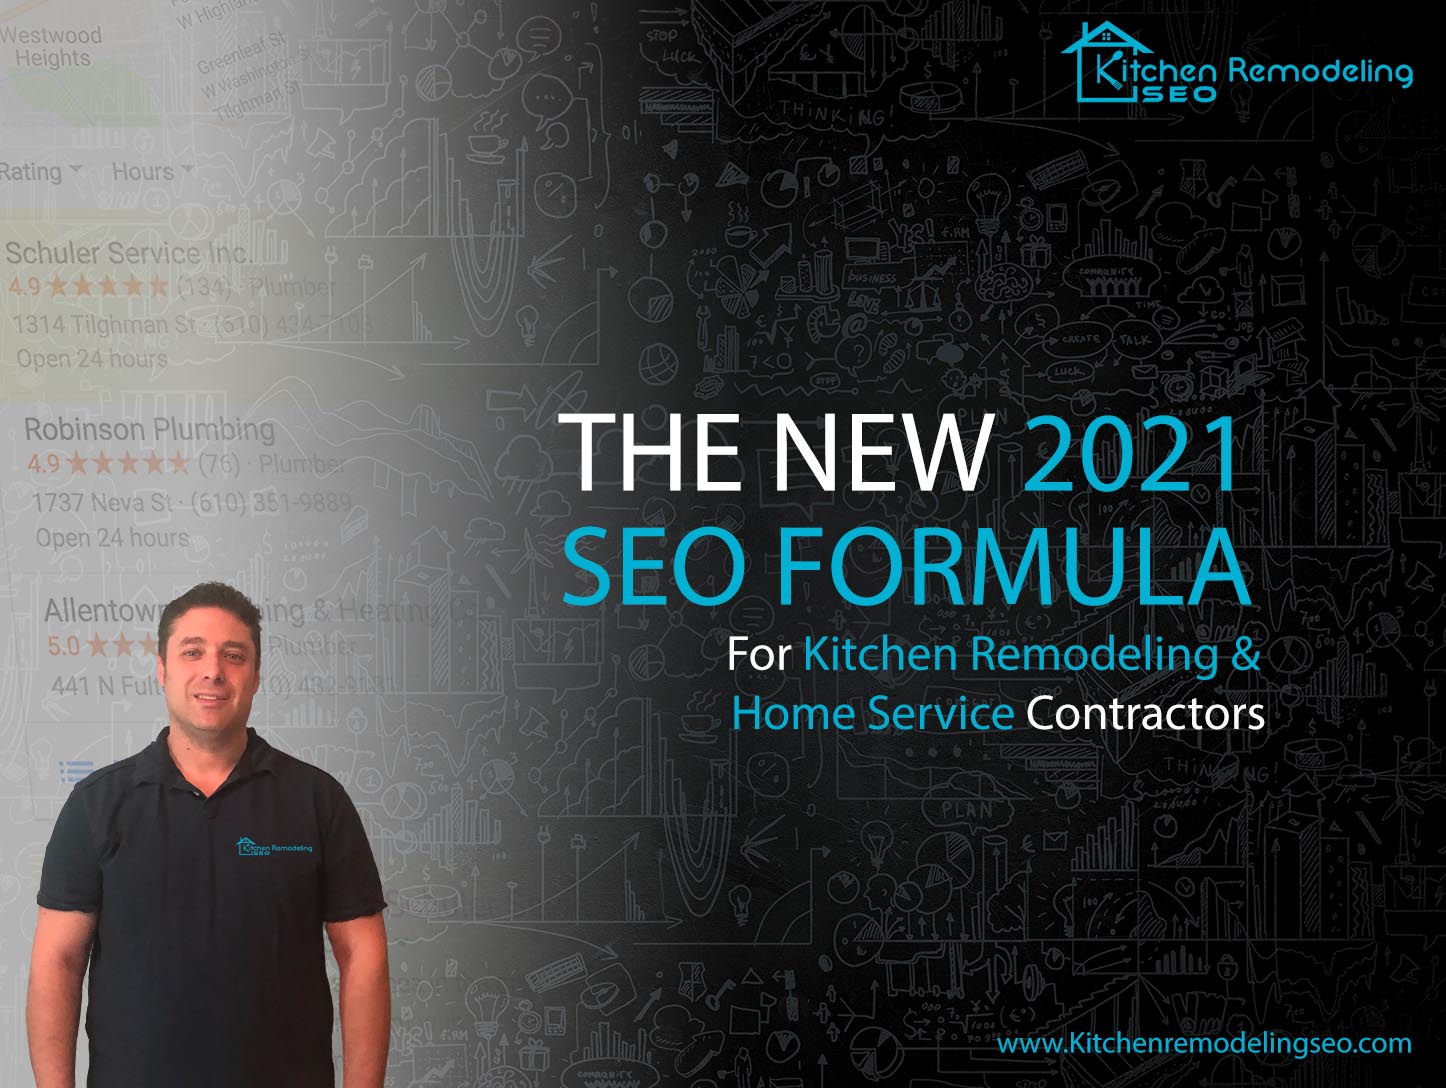 Kitchen Remodeling SEO Approved to Offer Search Engine Marketing Classes for CU Credits to KNBA Members